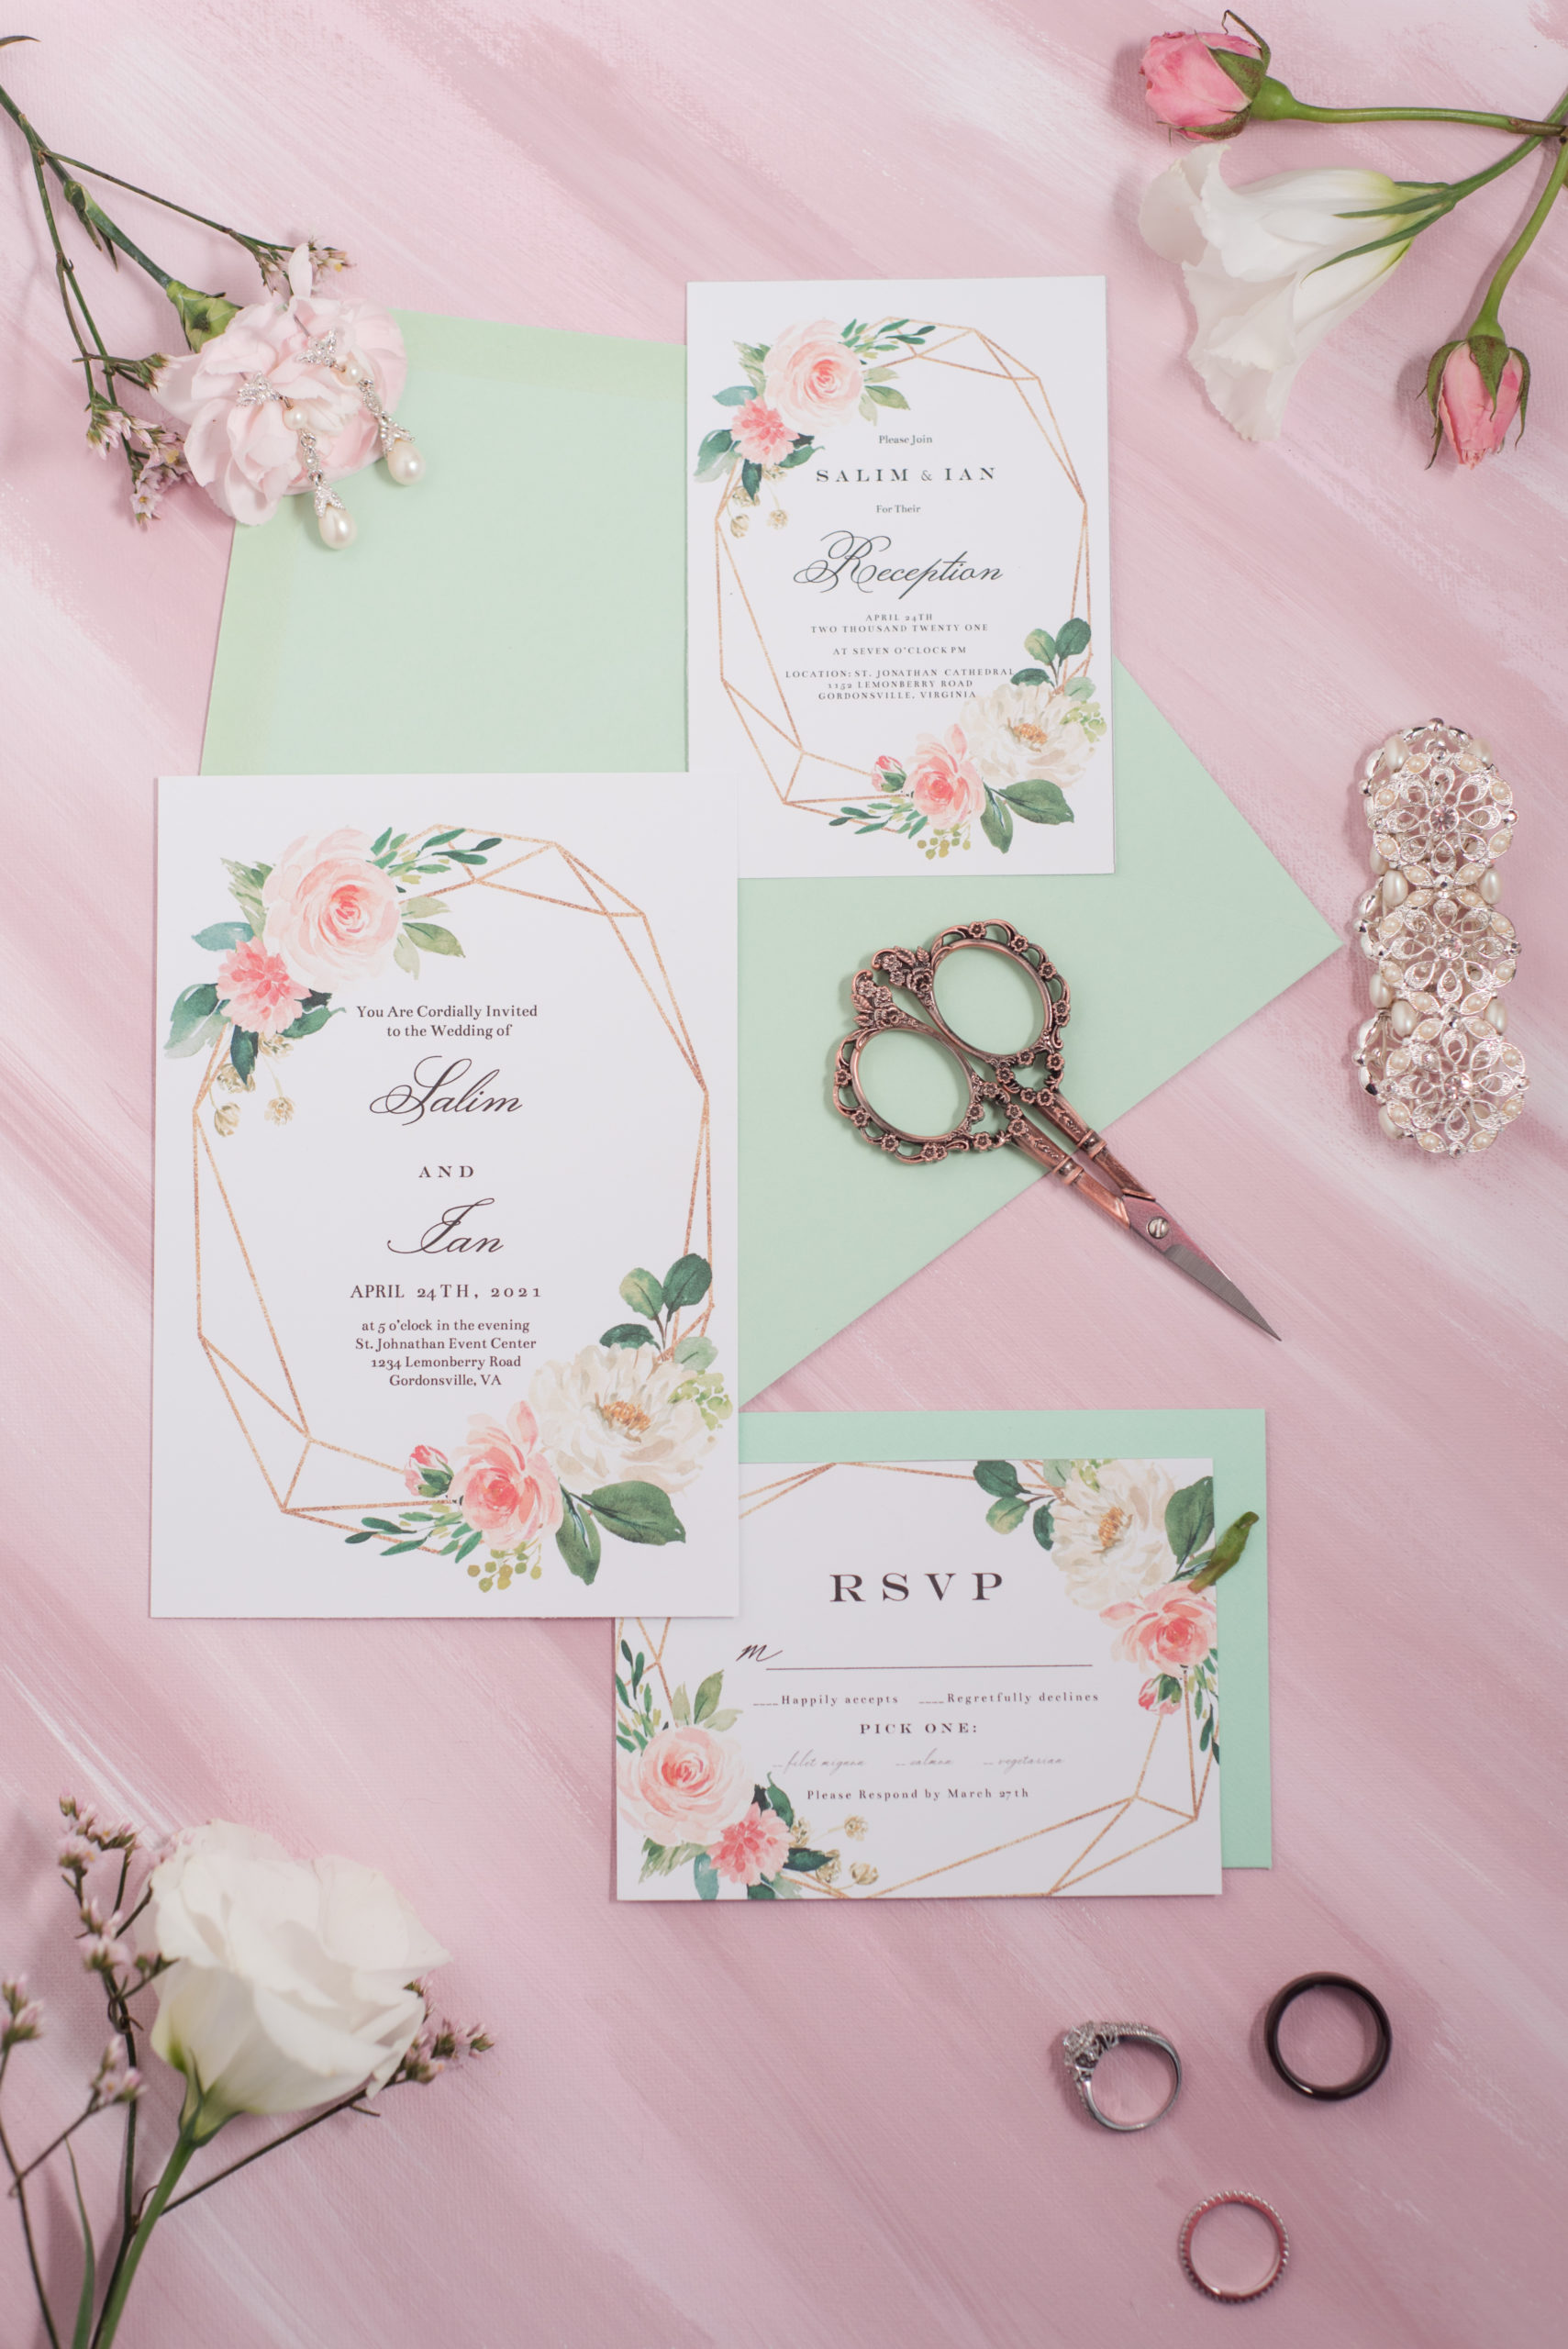 flaty lay with invitation suite for styled shoot